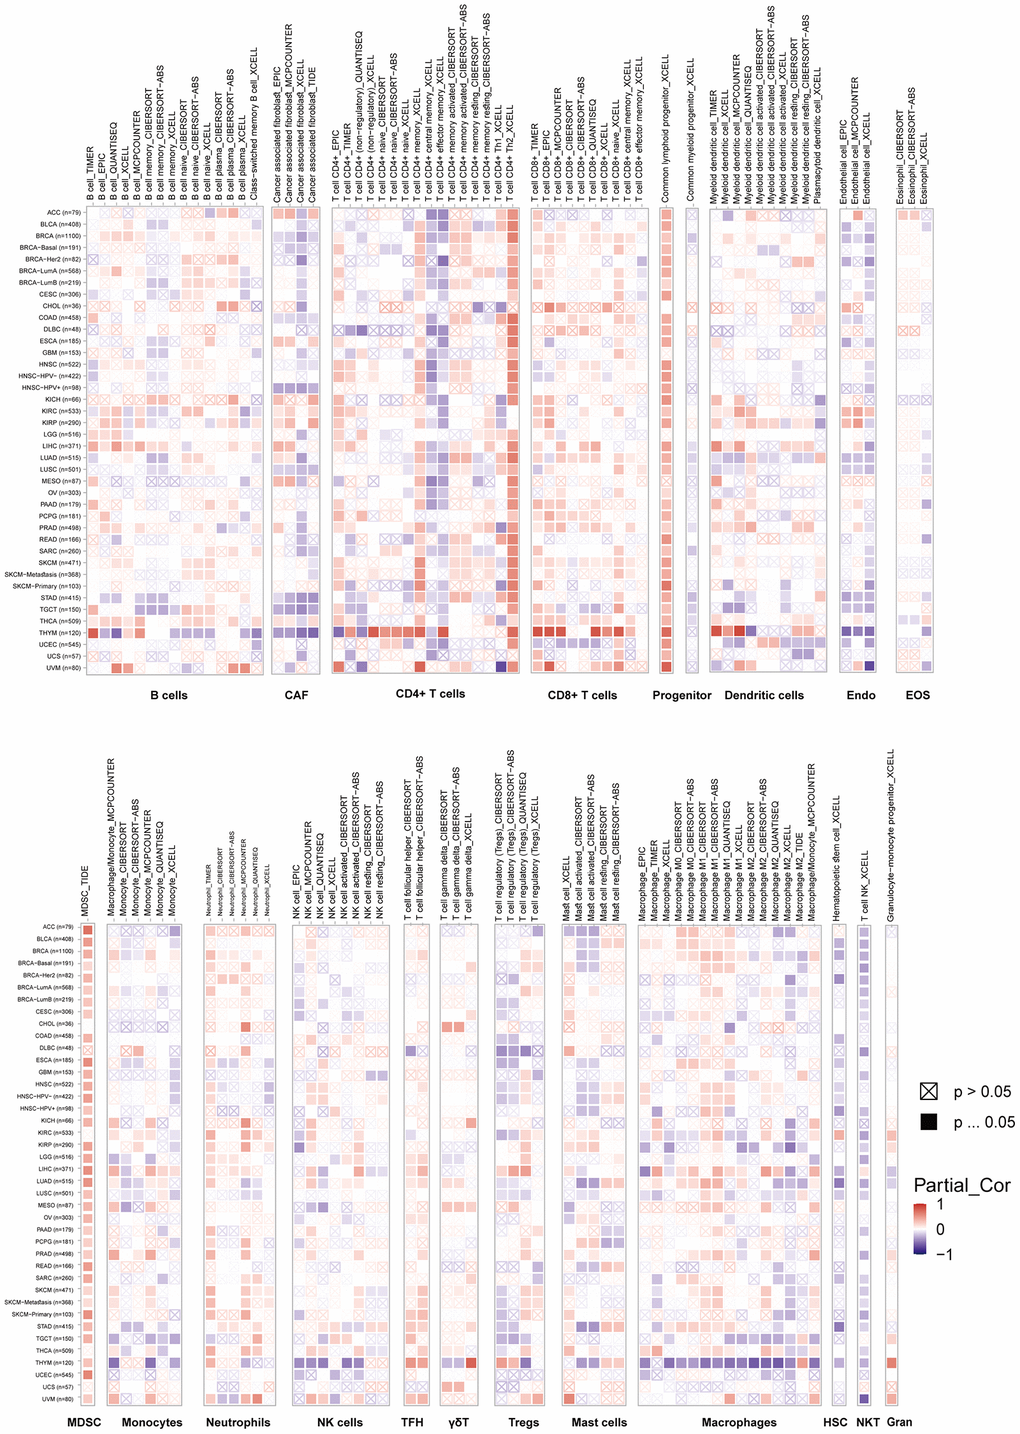 TIMER immune cell infiltration analyses. VRK1 expression correlates with the degree of infiltration of CD8+ T cells, CD4+ T cells, regulatory T cells (Tregs), B cells, monocytes, macrophages, NK cells, dendritic cells, mast cells, CAFs, progenitors, Endo, Eos, HSCs, TFH cells, dT cells, NKT cells, MDSCs, and neutrophils in malignancies. A positive correlation is shown in red, while a negative correlation is in blue.